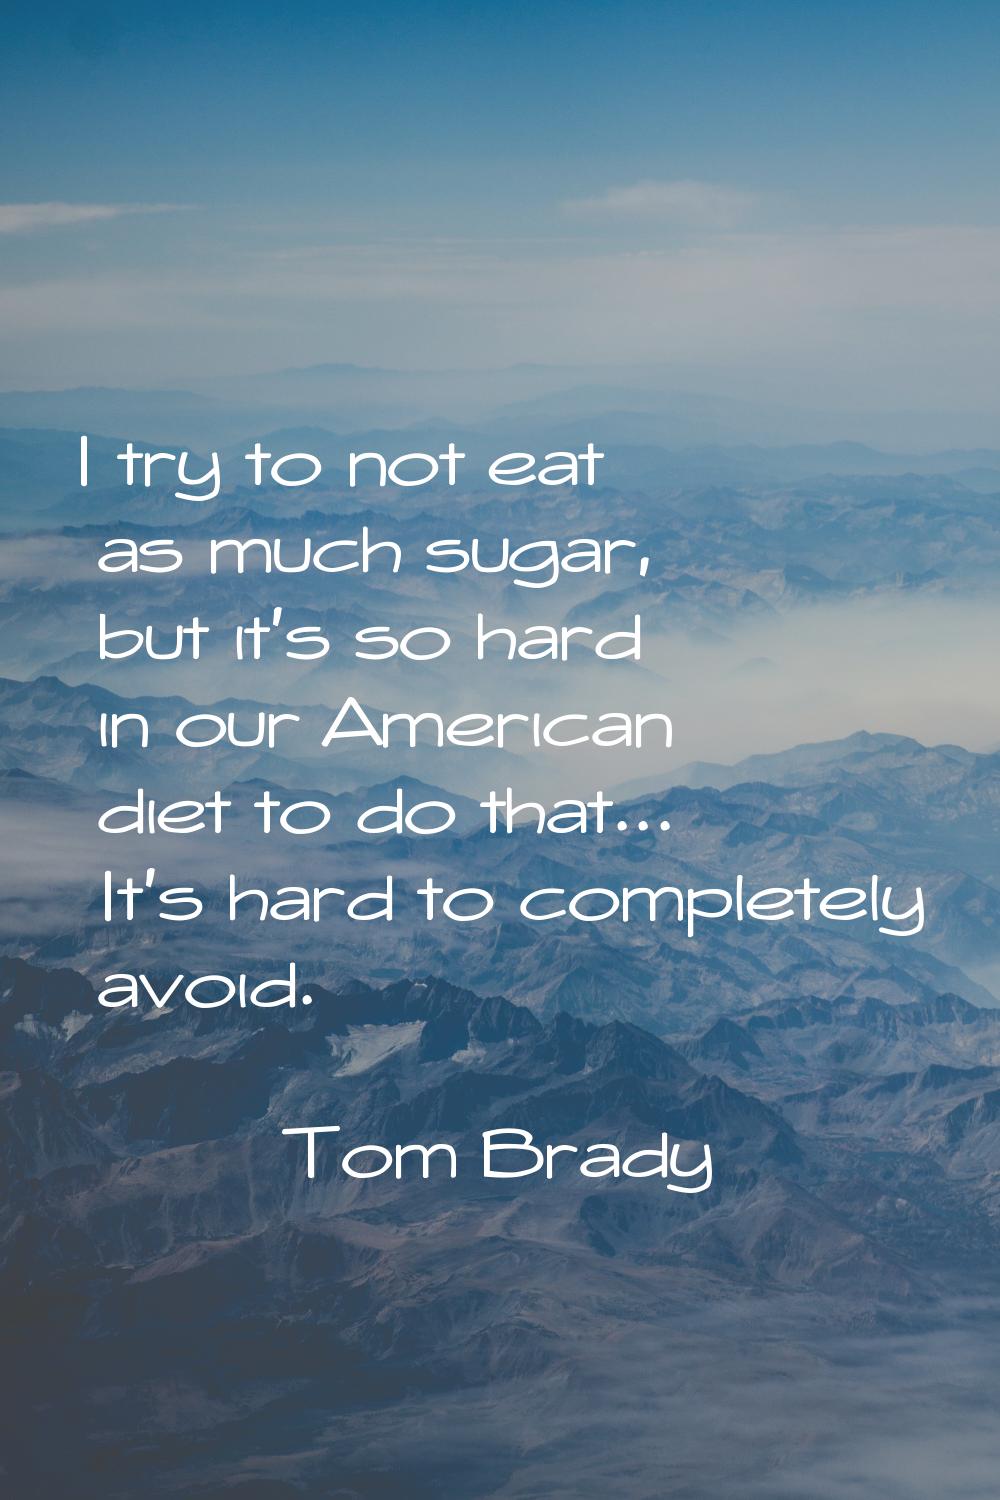 I try to not eat as much sugar, but it's so hard in our American diet to do that... It's hard to co